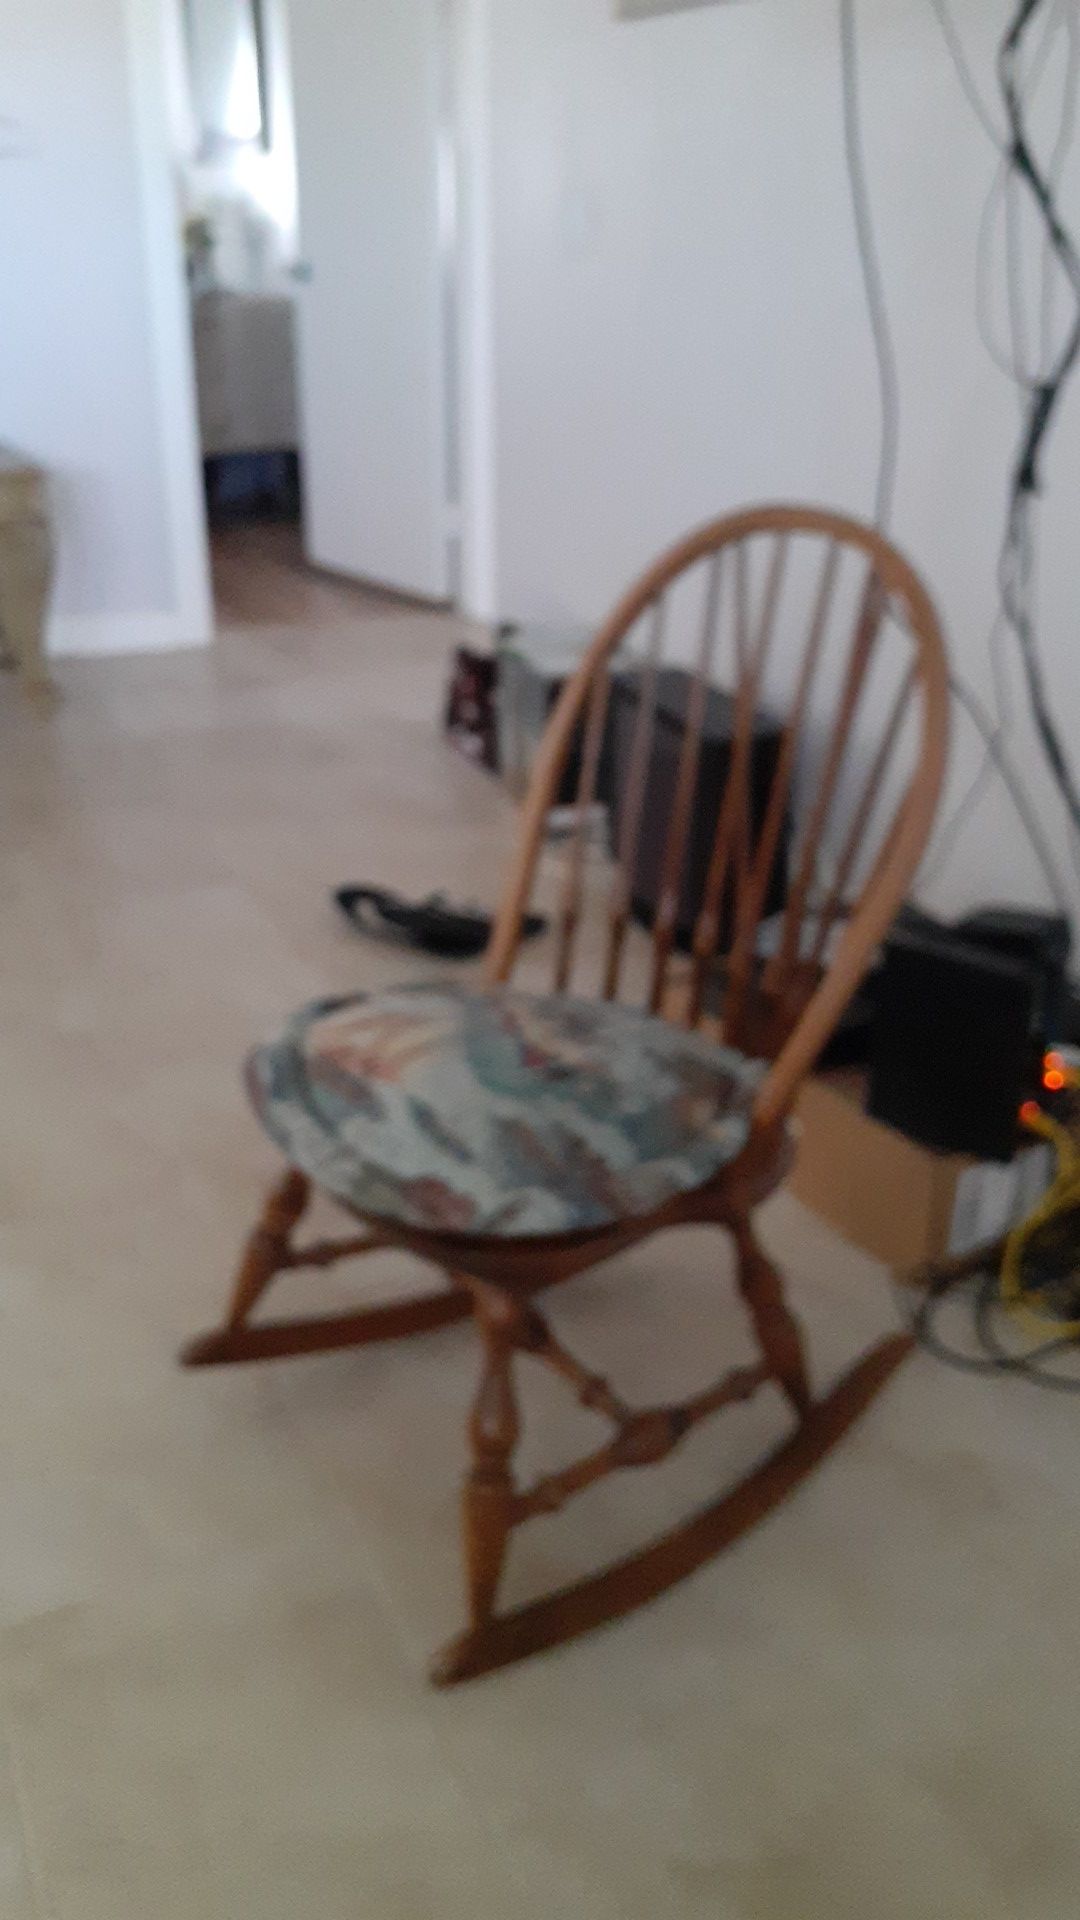 Antique sails themed rocking chair